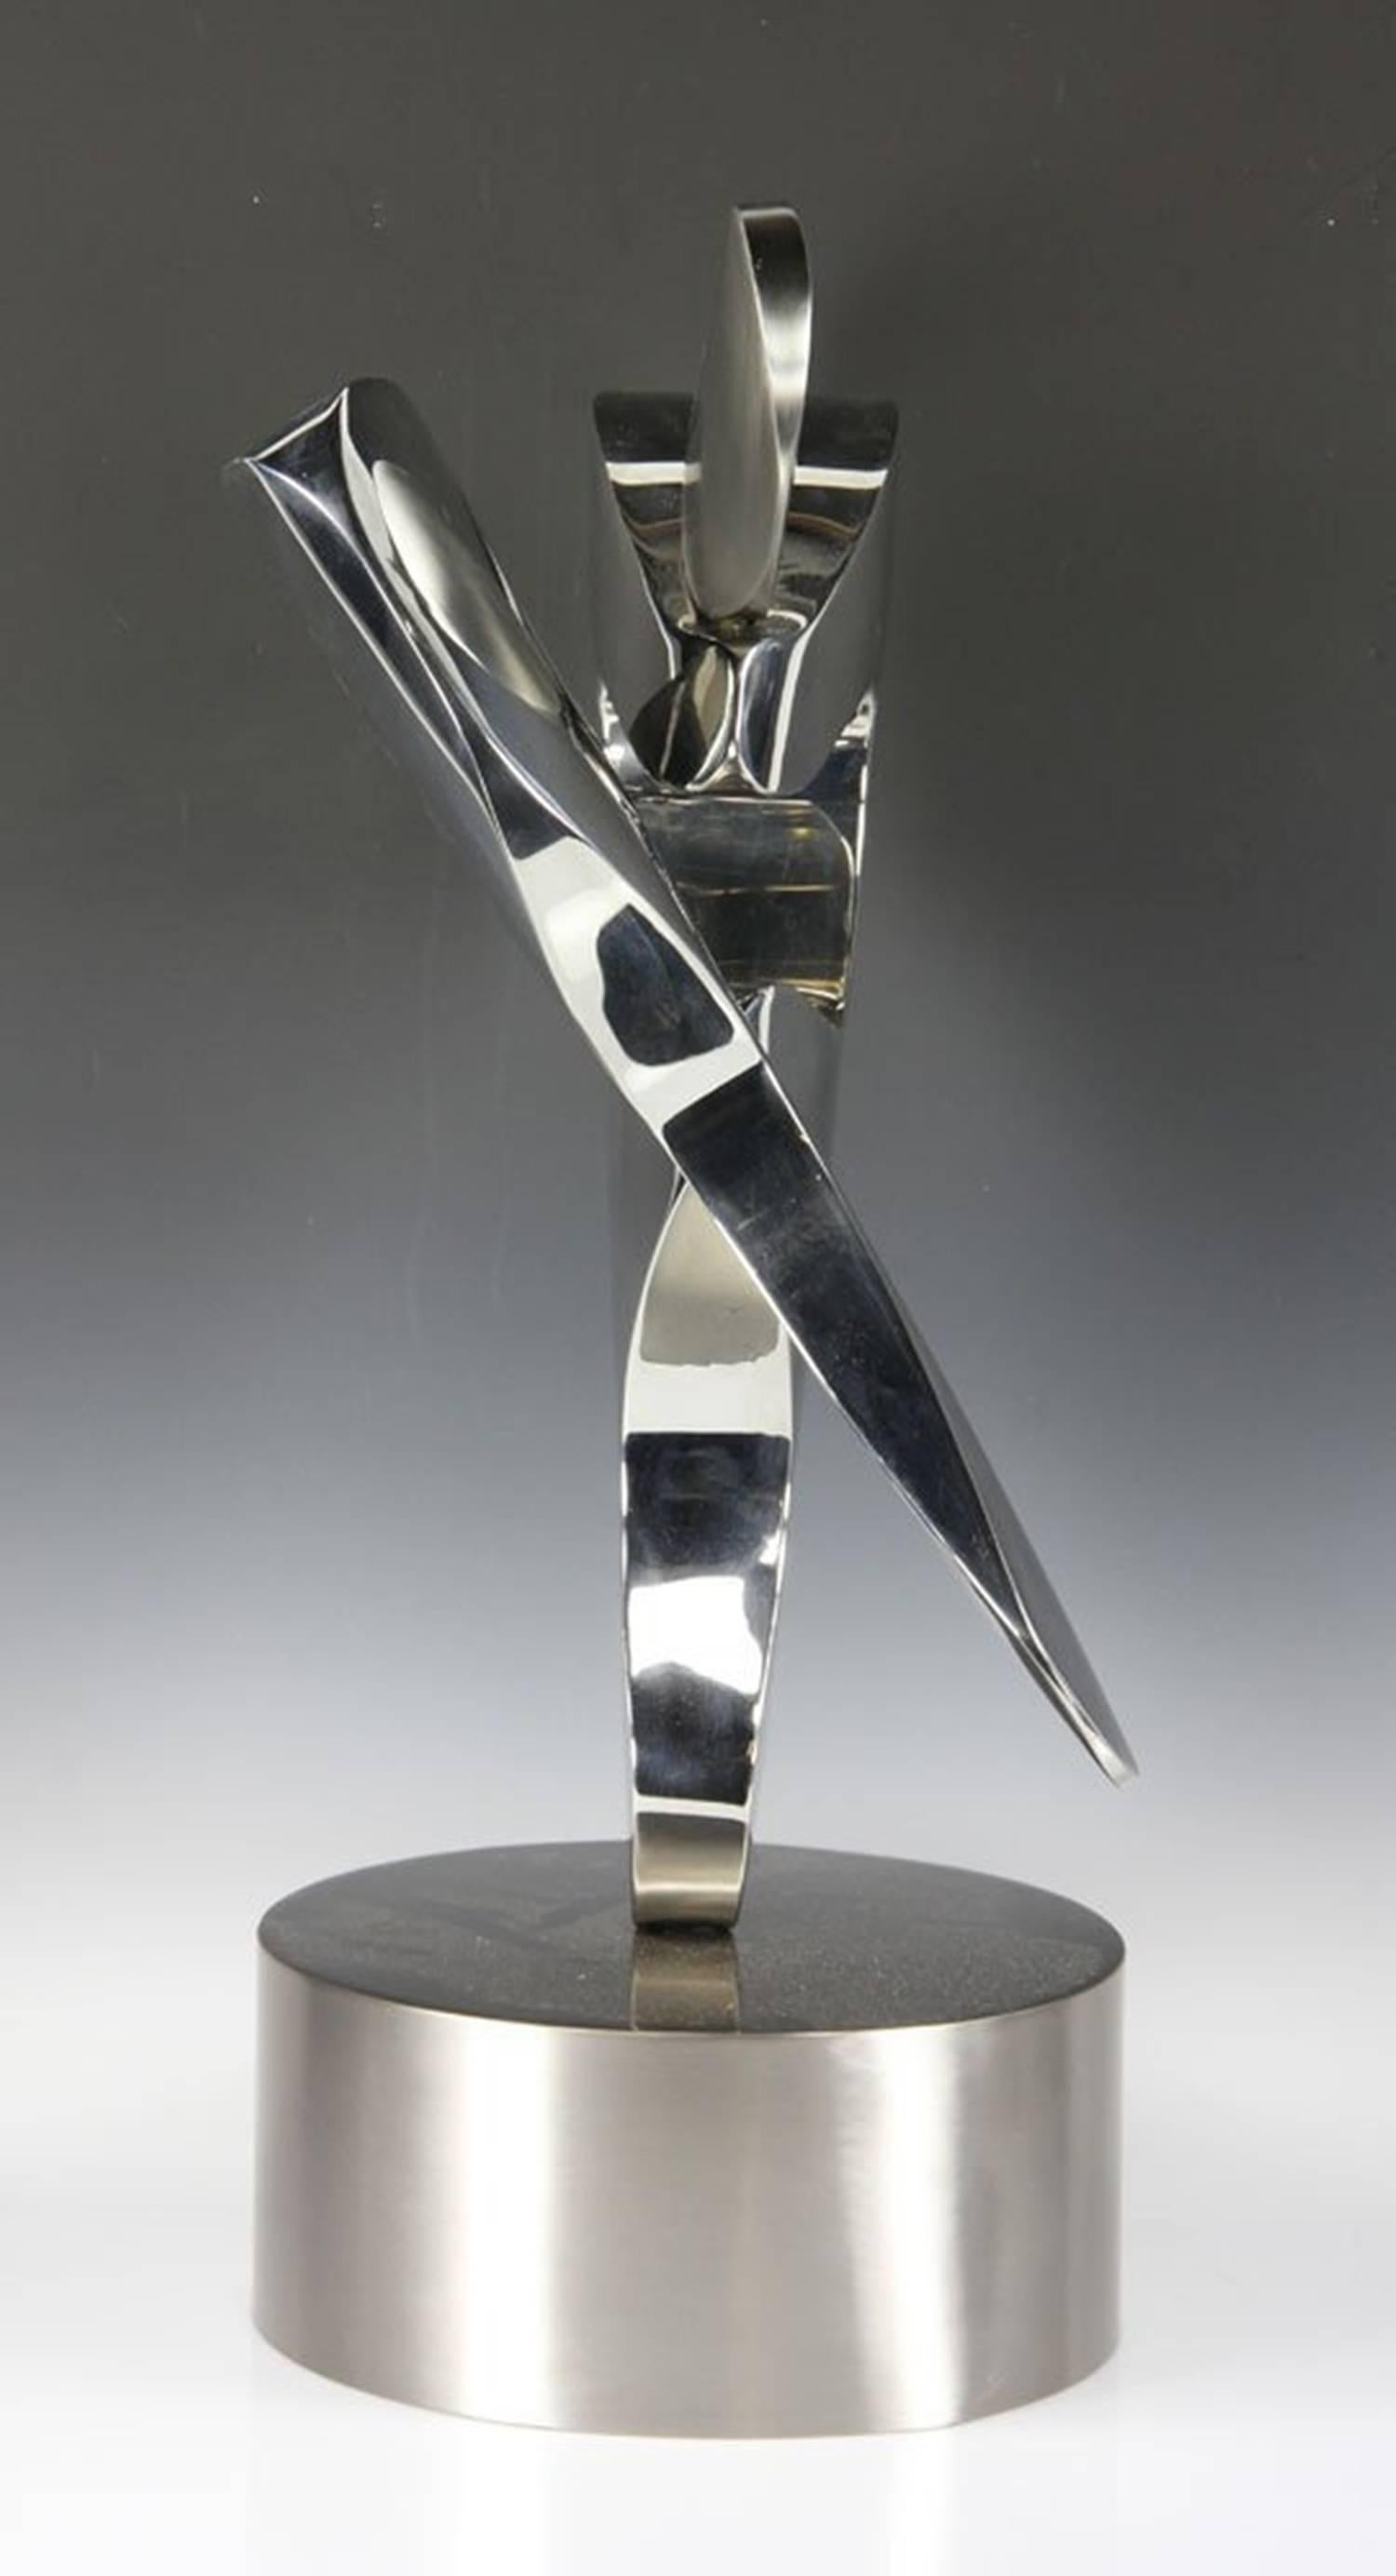 Beautiful free-form stainless steel sculpture masterfully executed by the world renown sculptor Michael Oguns.
The sculpture flows very organically and the high polished stainless steel makes every curve Stand out beautifully.

The piece is